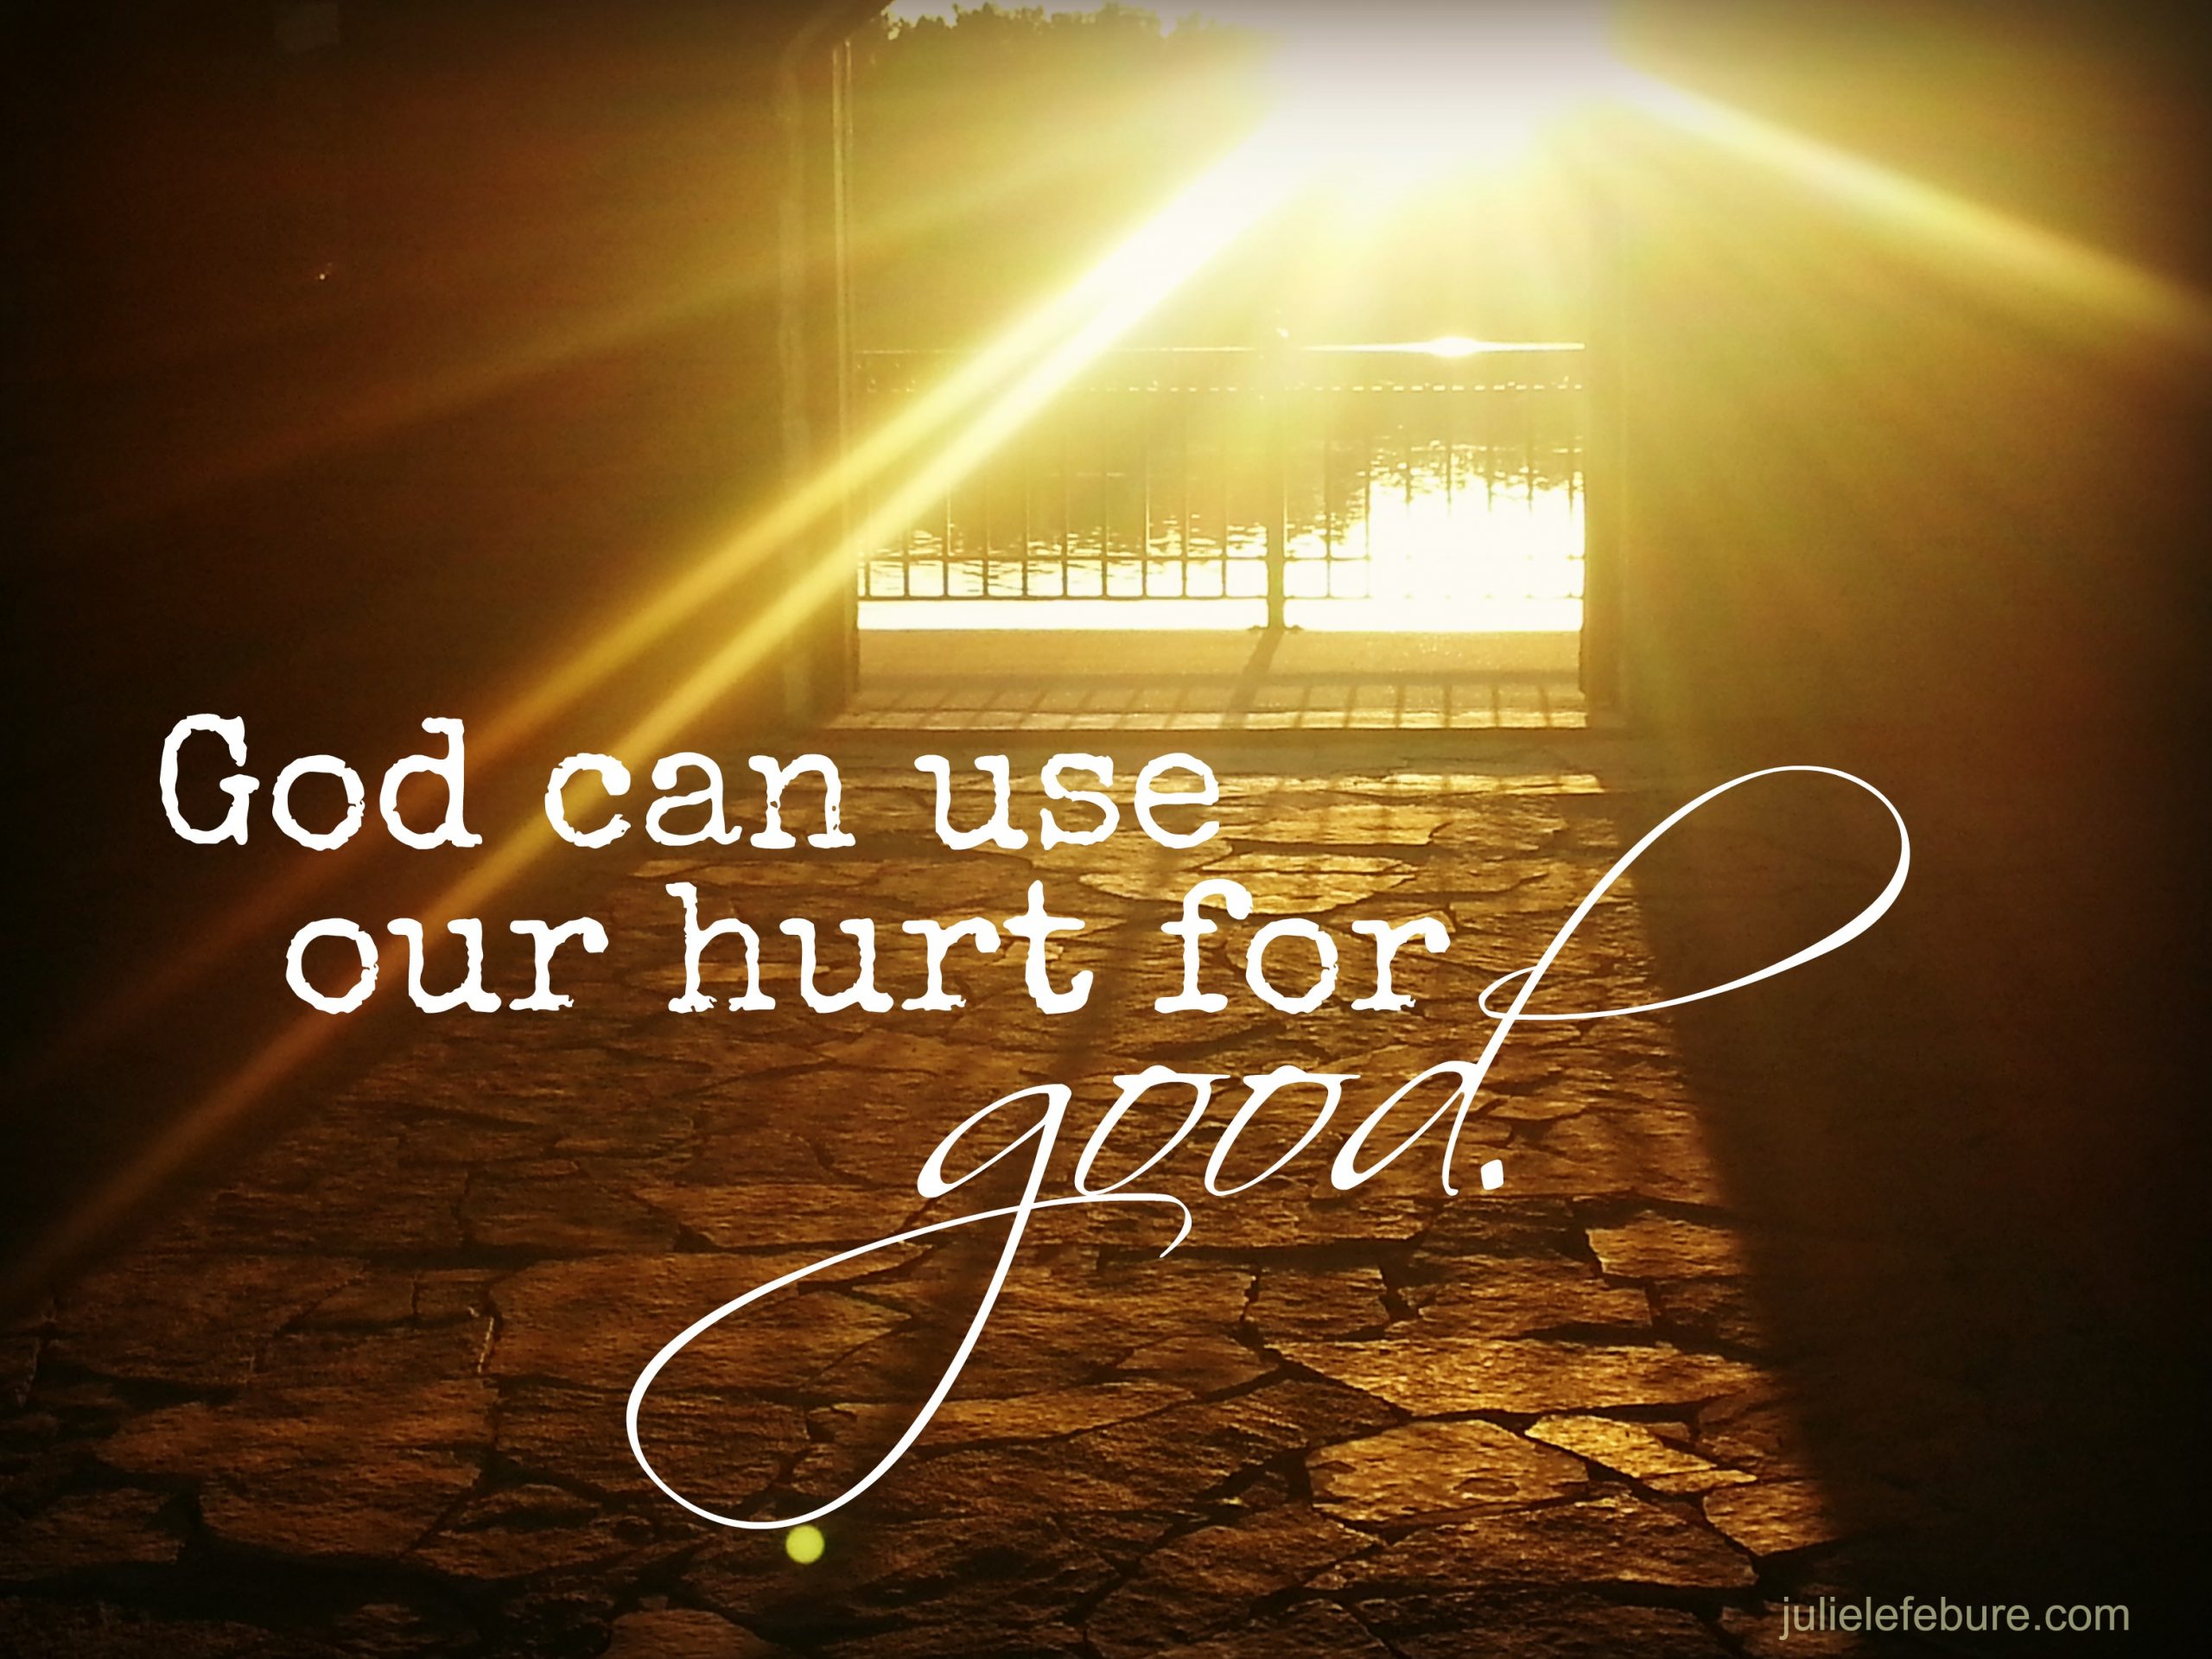 When Our Hurt Can Be Something For Good